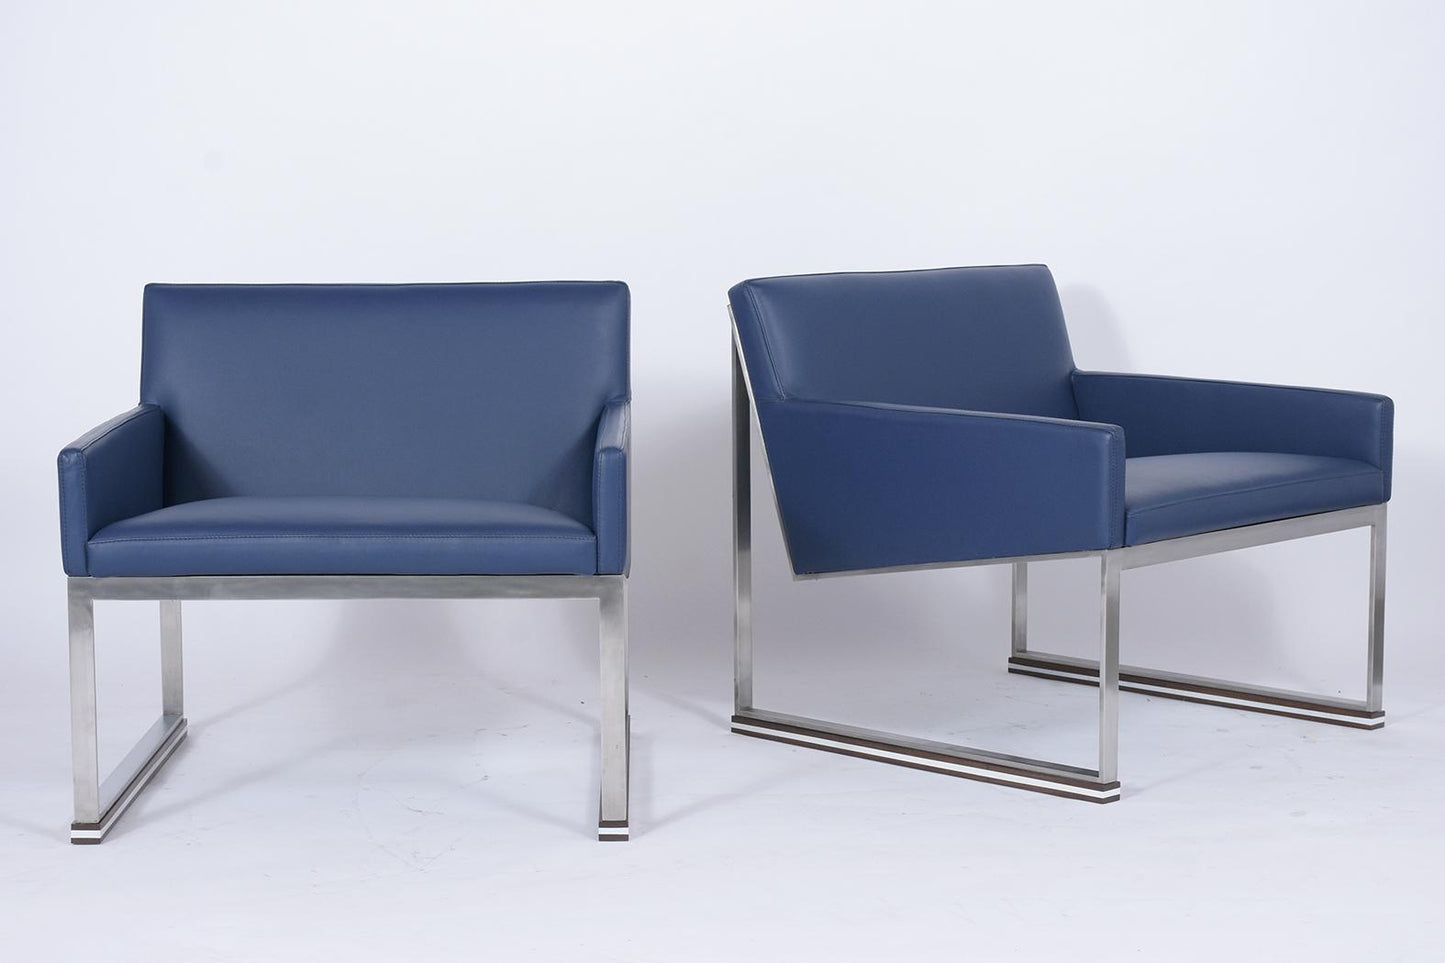 Blue Leather Mid-Century Modern Lounge Chairs